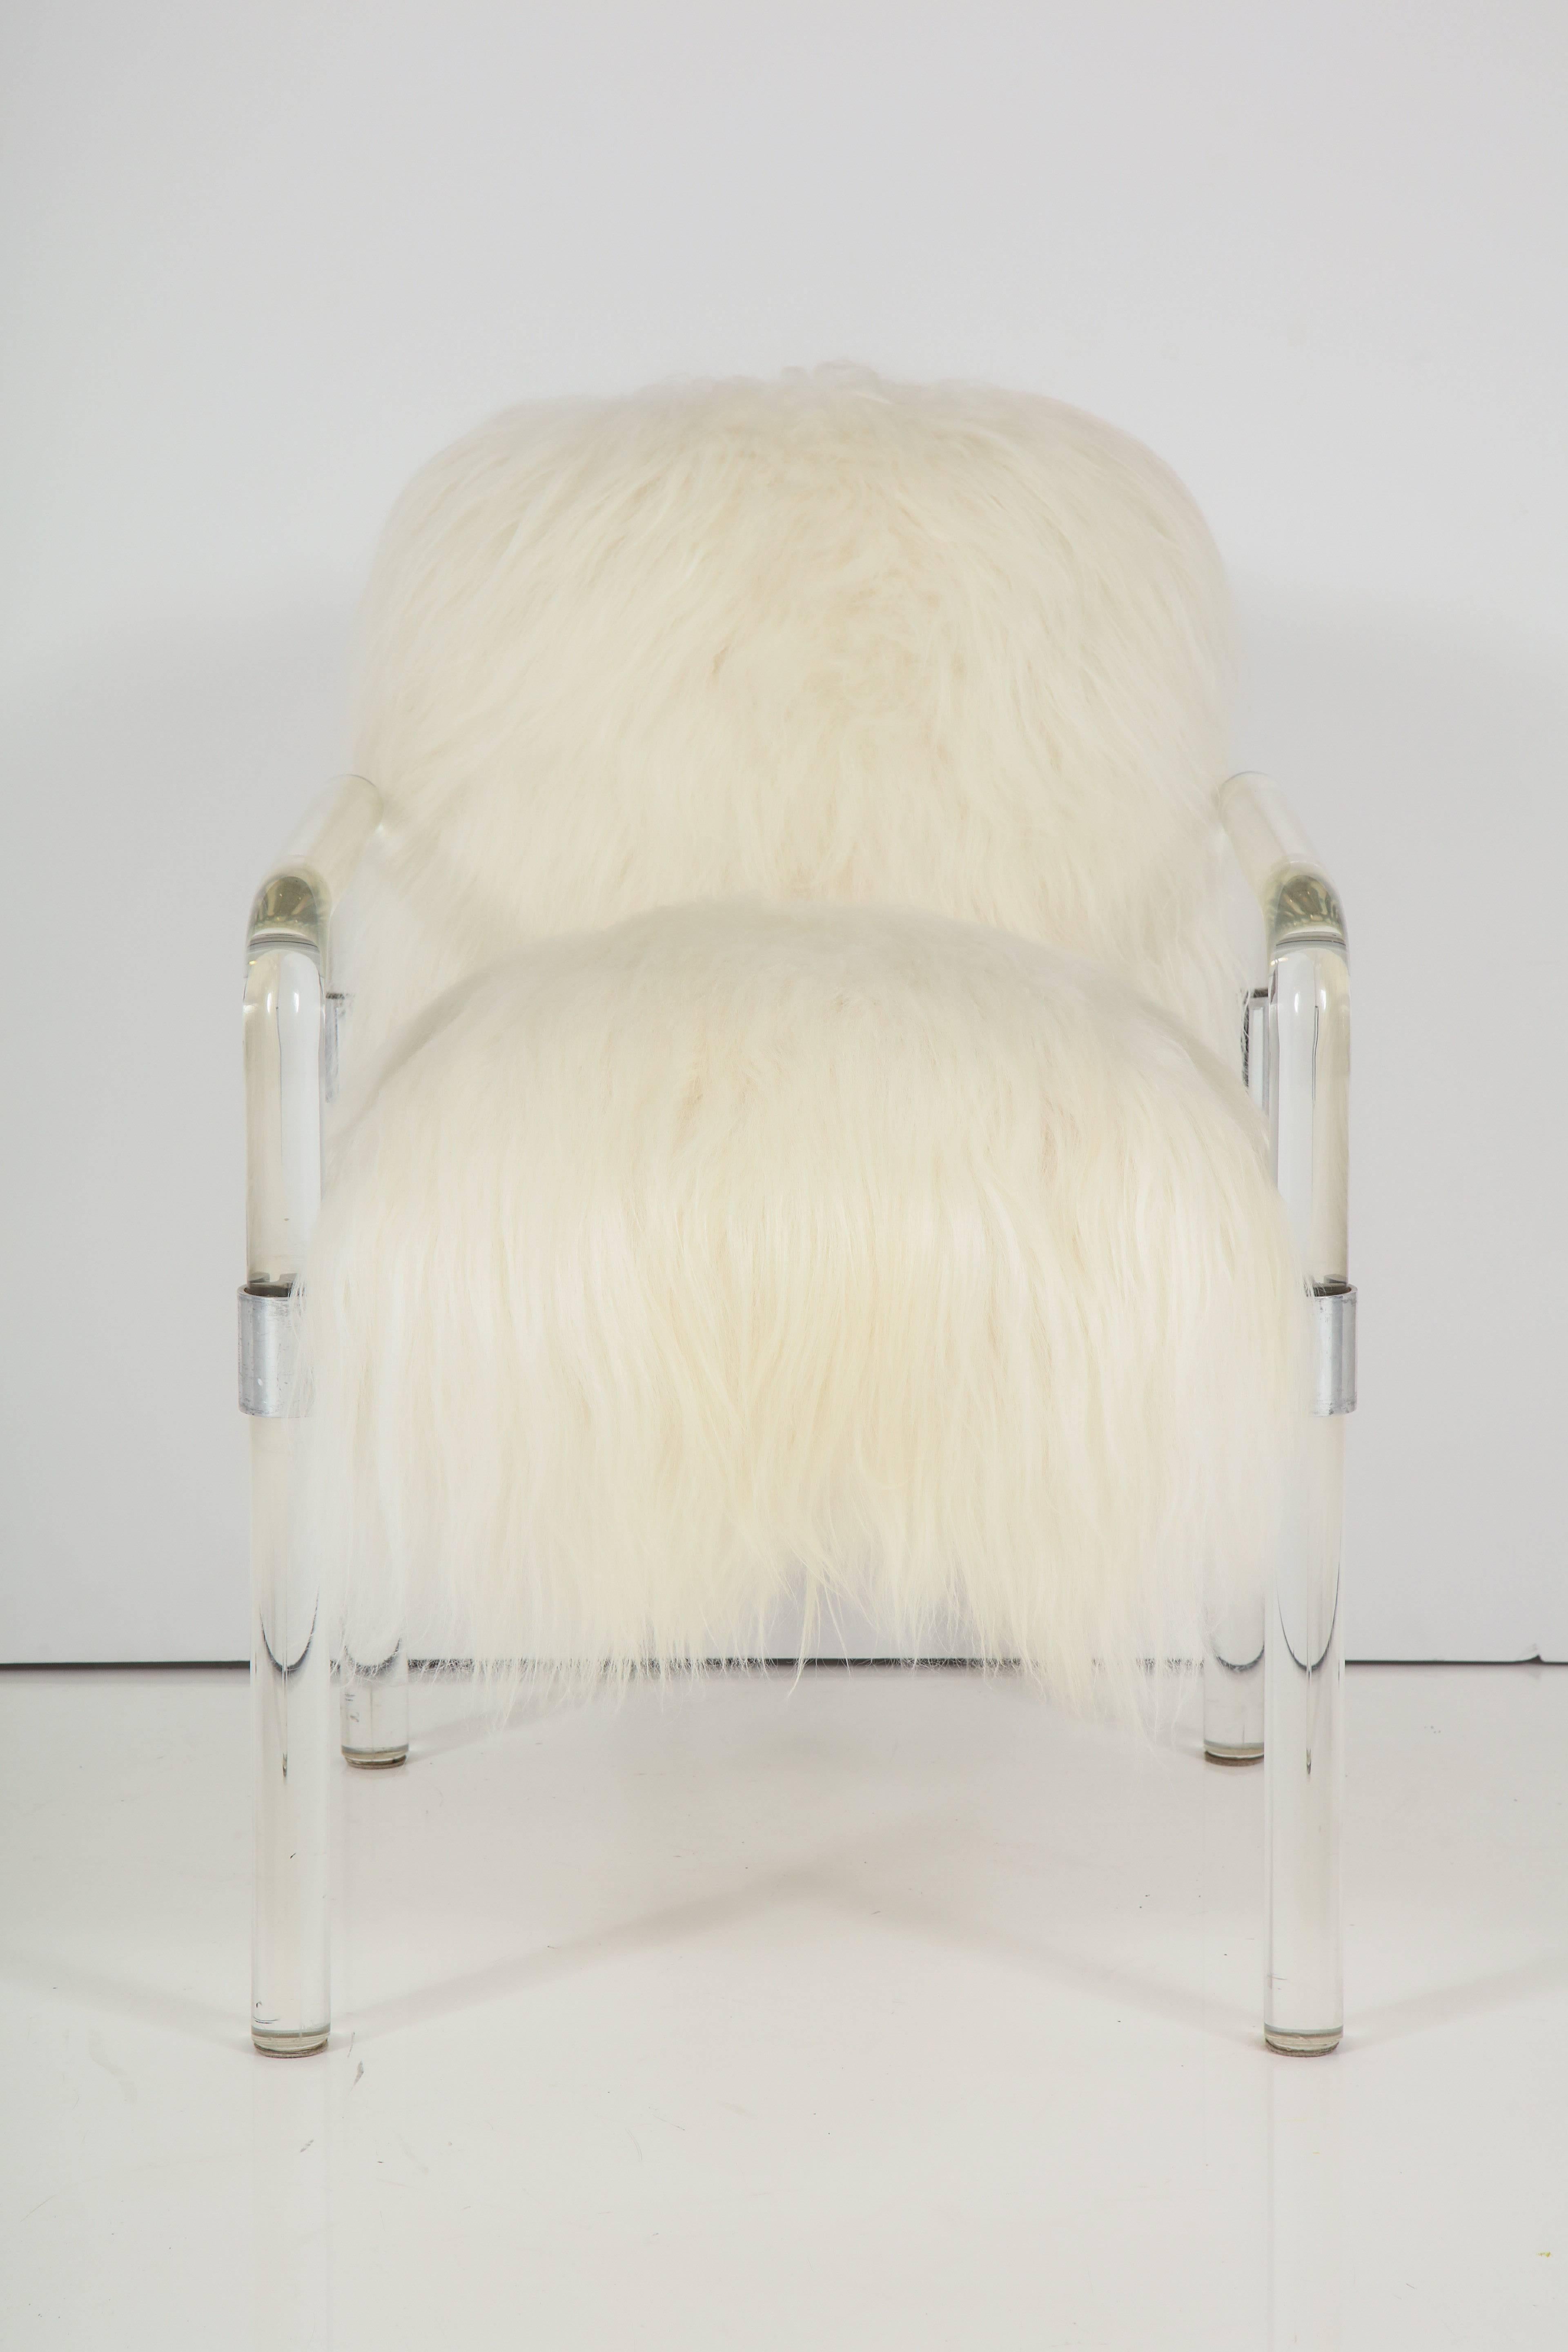 Pipeline series Lucite armchair or desk chair designed by Jeff Messerschmidt in luxurious pure white long hair arctic sheepskin. New upholstery is dense and extremely soft, frame is structurally strong showing minimal wear.